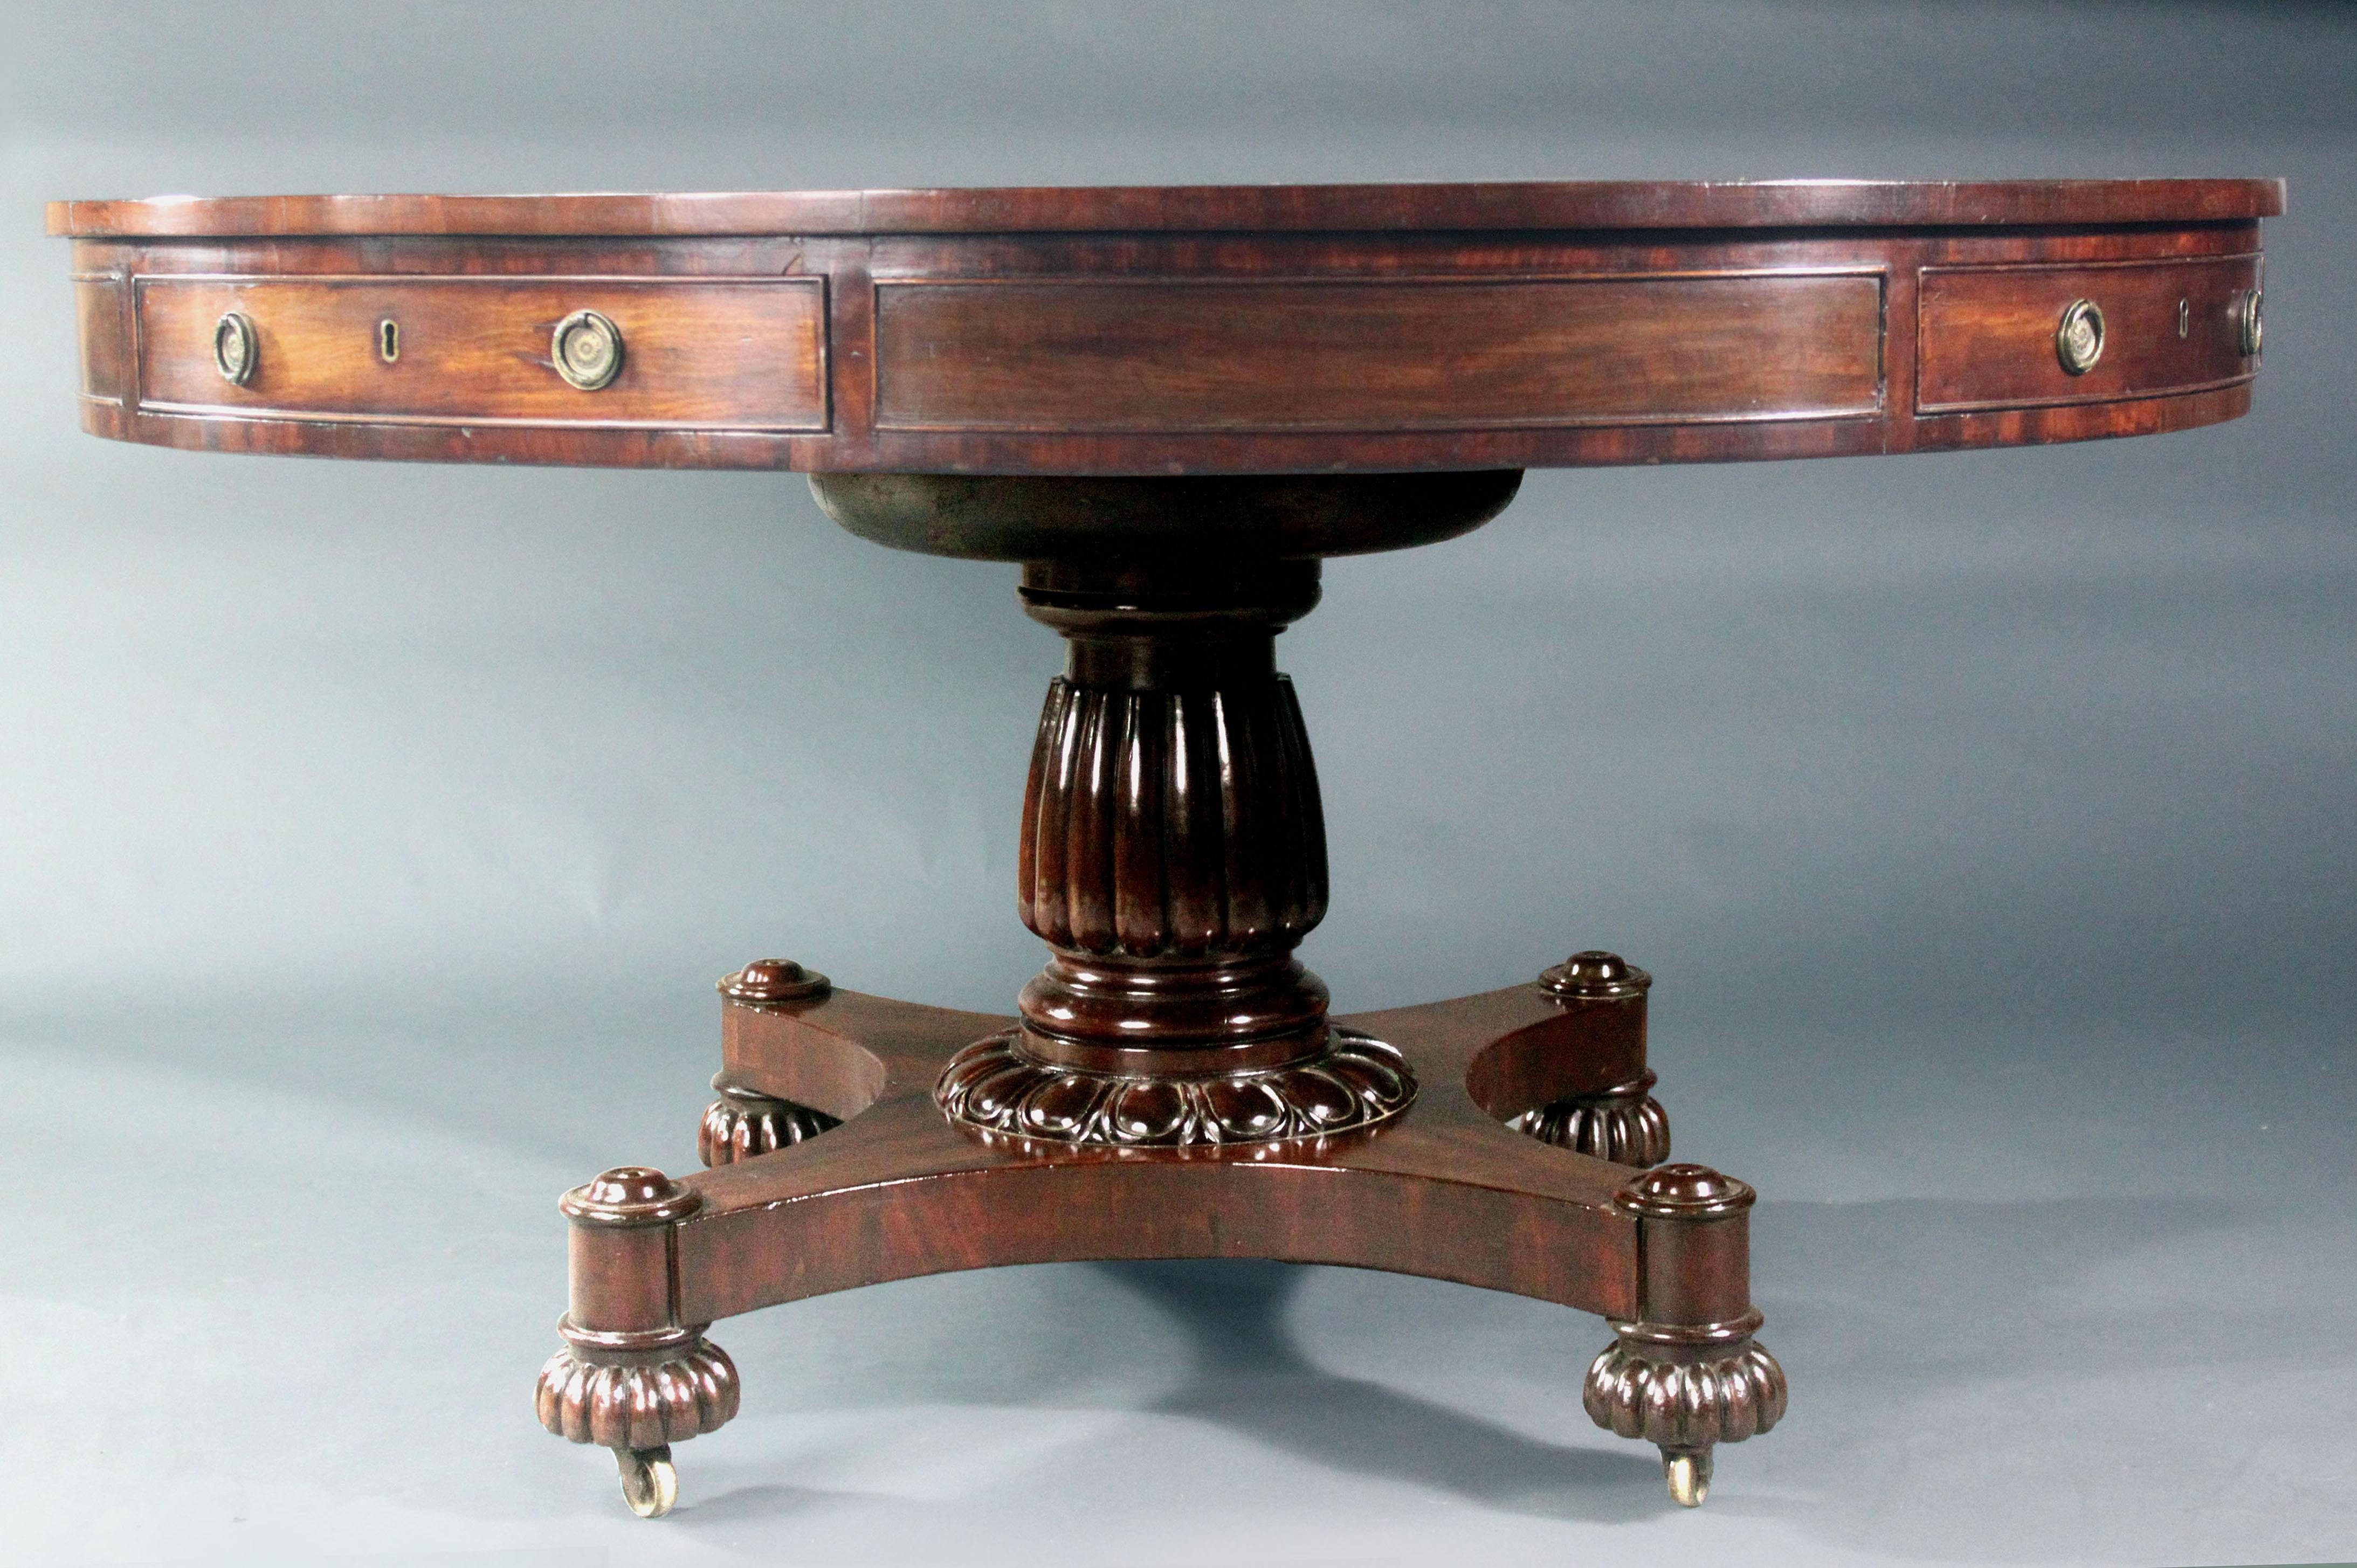 George IV Mahogany Drum Table
A good George IV mahogany drum table on carved reeded stem, platform base and reeded bun feet; elegant shallow top, oak lined drawers and attractive old green leather top; the top revolves on a gimbal.
Good size 52.5